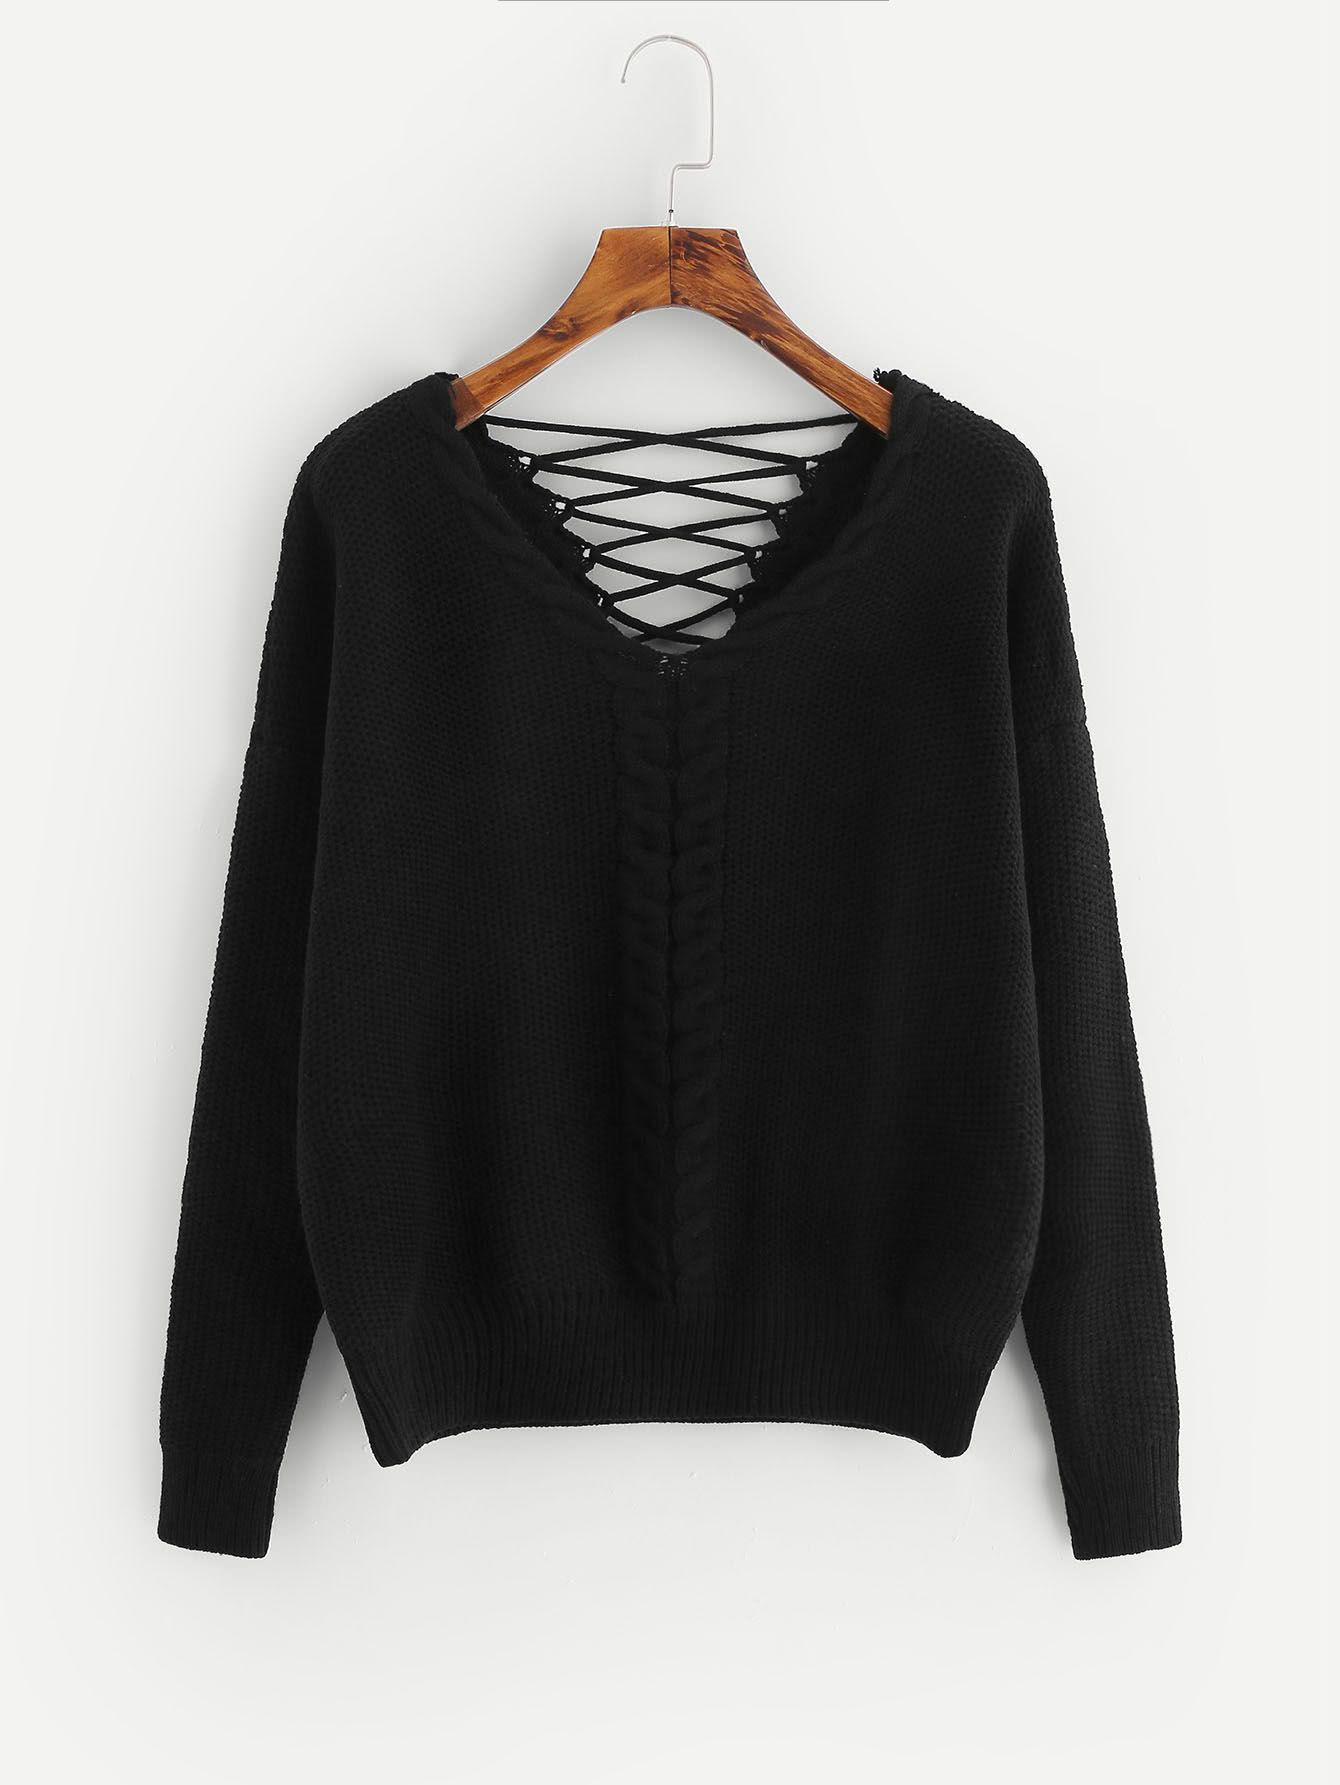 Lace Up Back Cable Knit Sweater | SHEIN